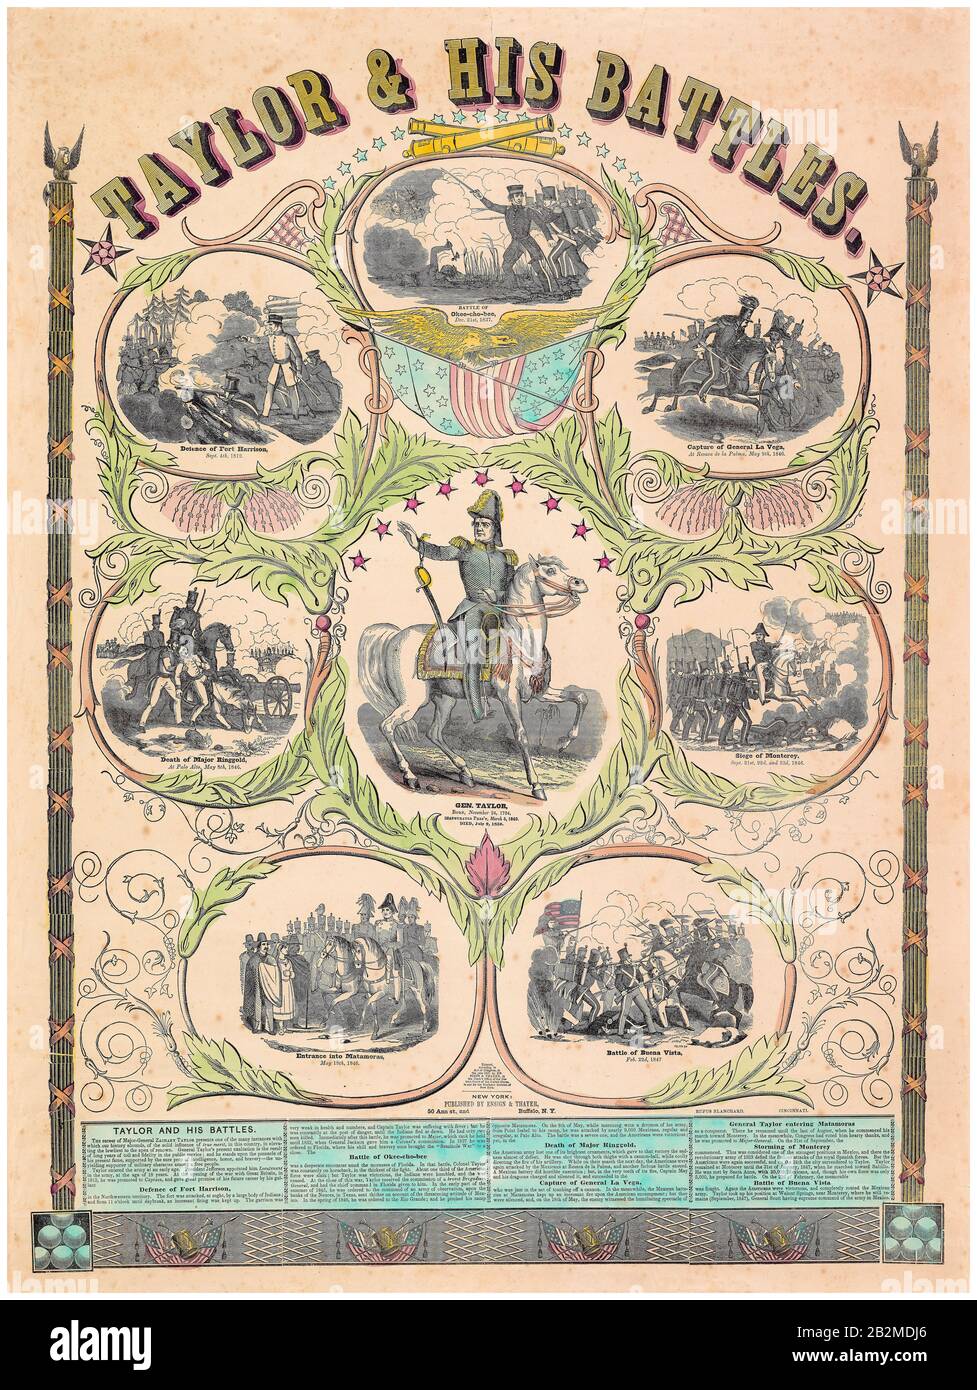 The Battles of Major General Zachary Taylor, infographic poster by Rufus Blanchard, 1847-1848 Stock Photo